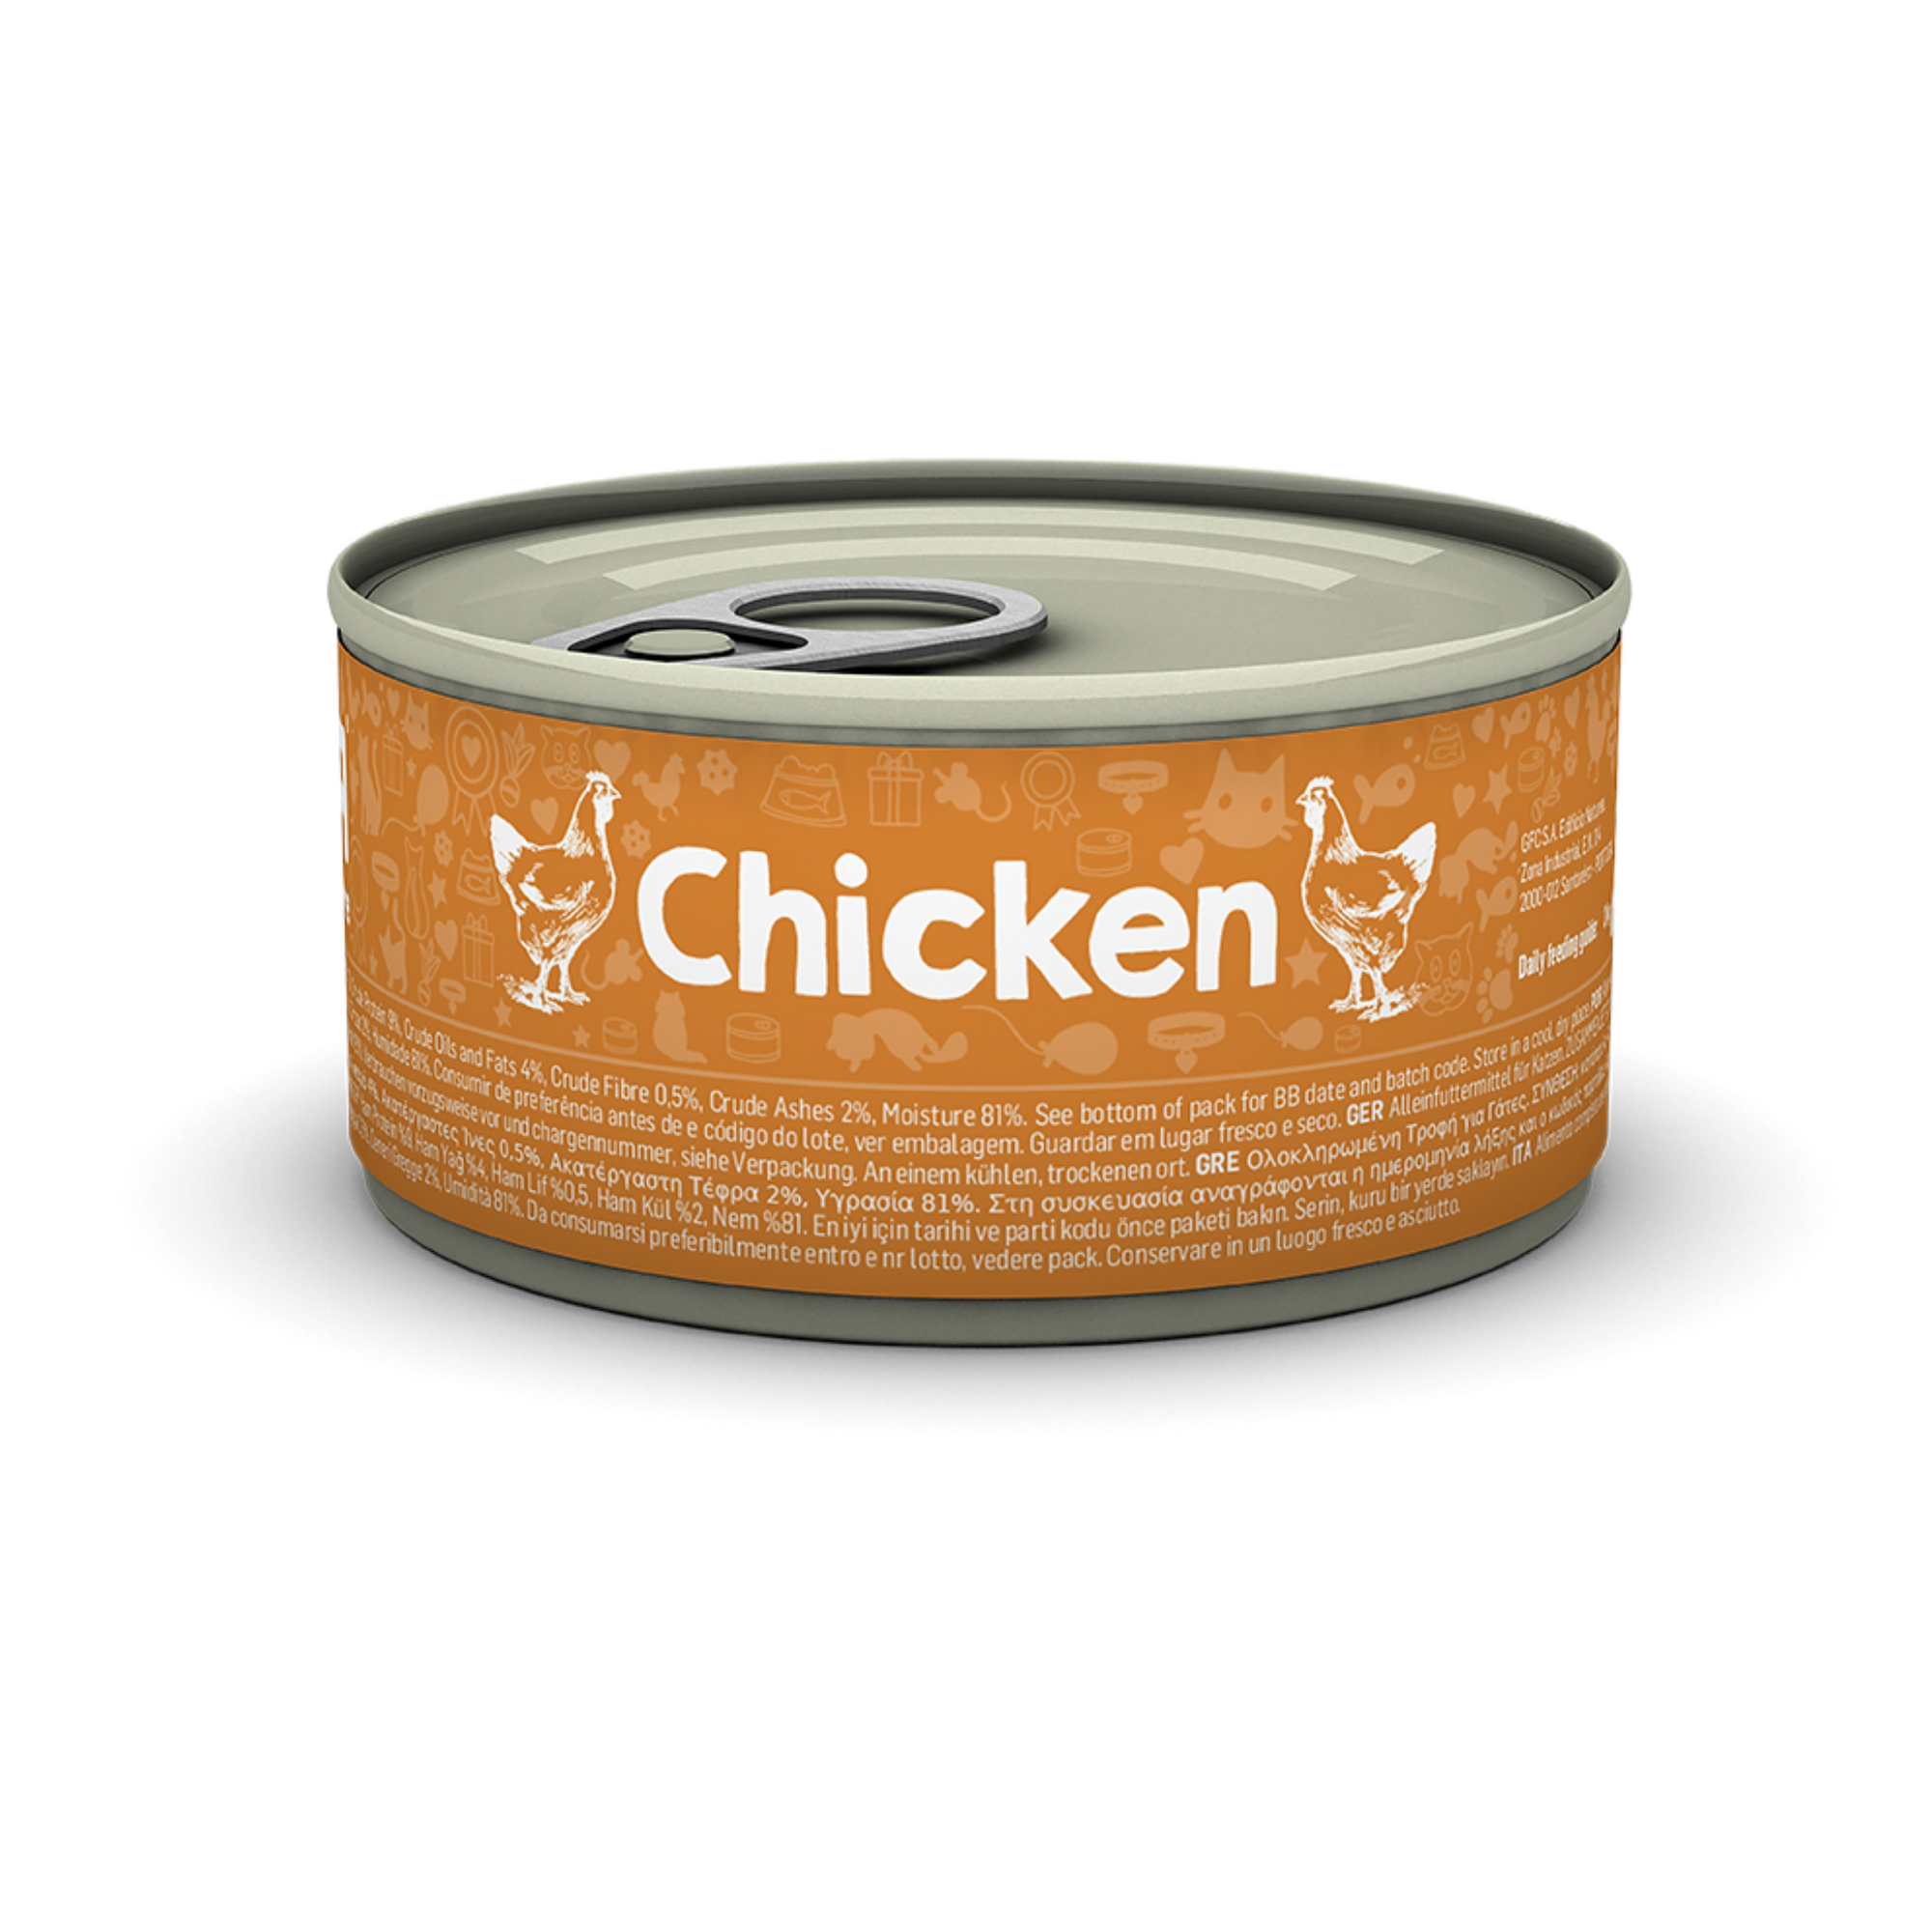 Canned chicken meat for cats and kittens